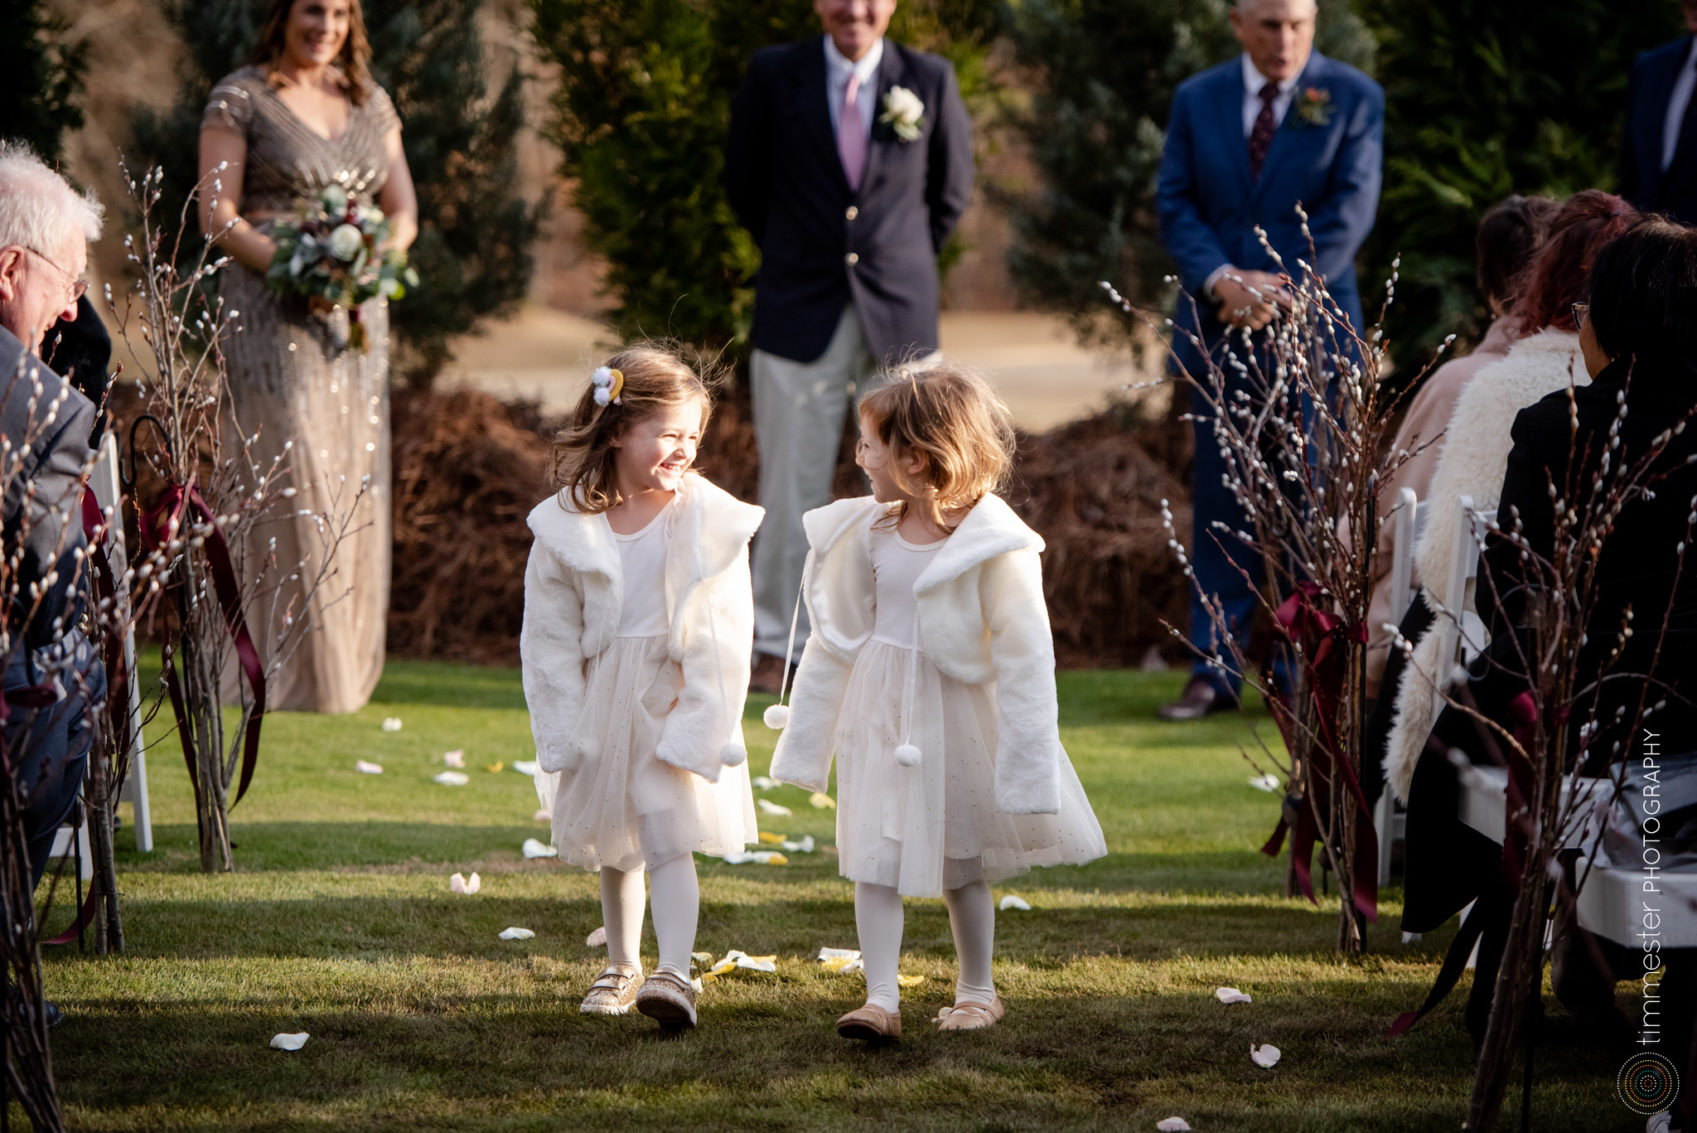 Flowergirls after the ceremony at Chapel Hill Carriage House in NC